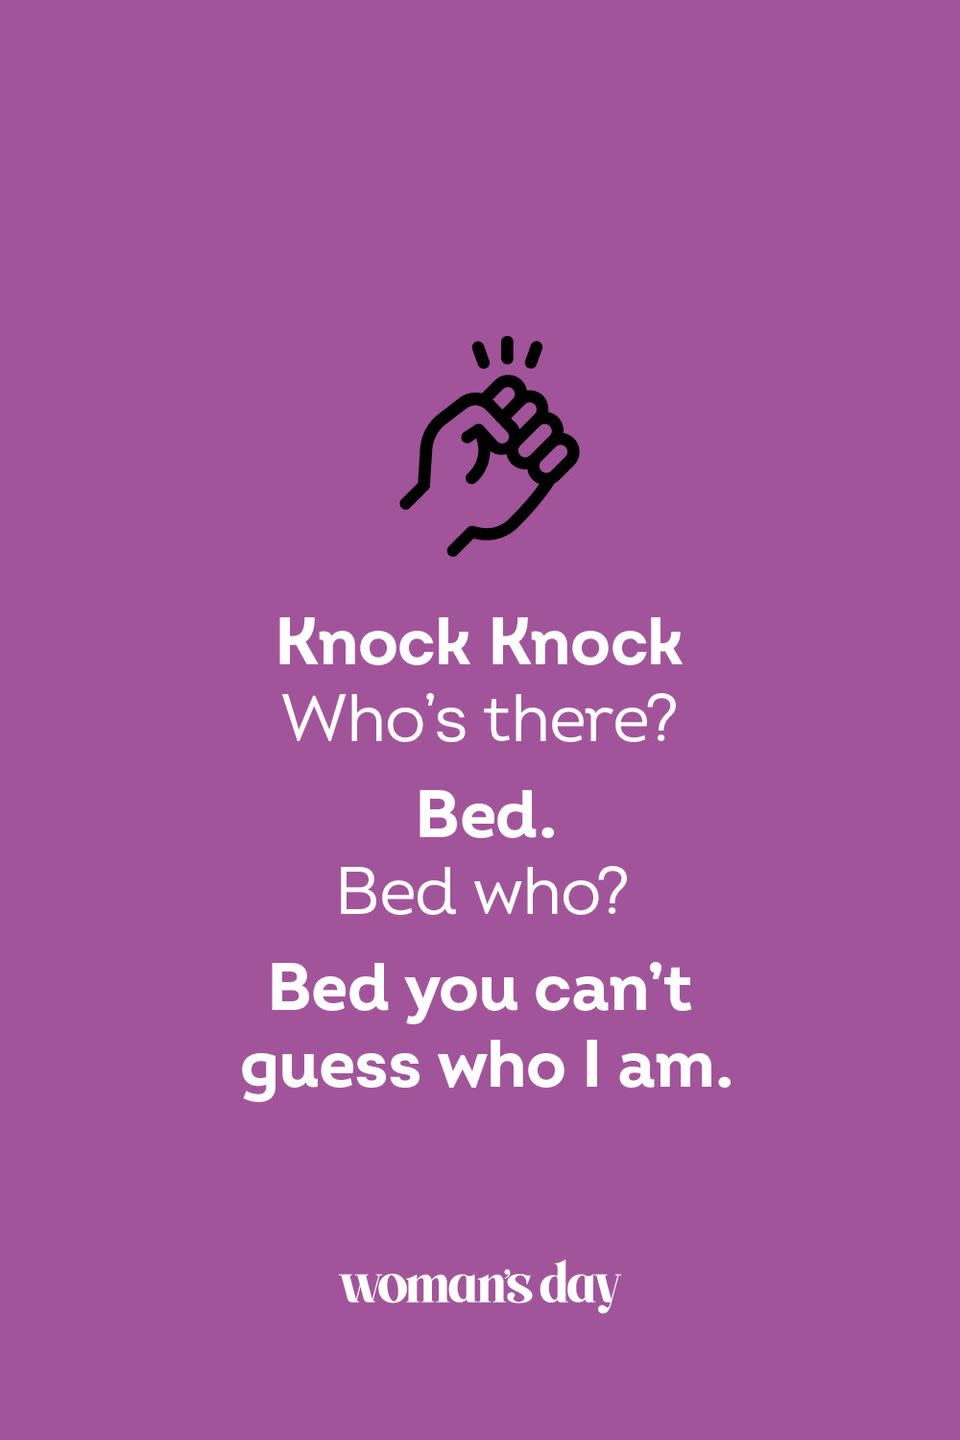 <p><strong>Knock Knock</strong></p><p><em>Who’s there? </em></p><p><strong>Bed.</strong></p><p><em>Bed who?</em></p><p><strong>Bed you can’t guess who I am.</strong></p>